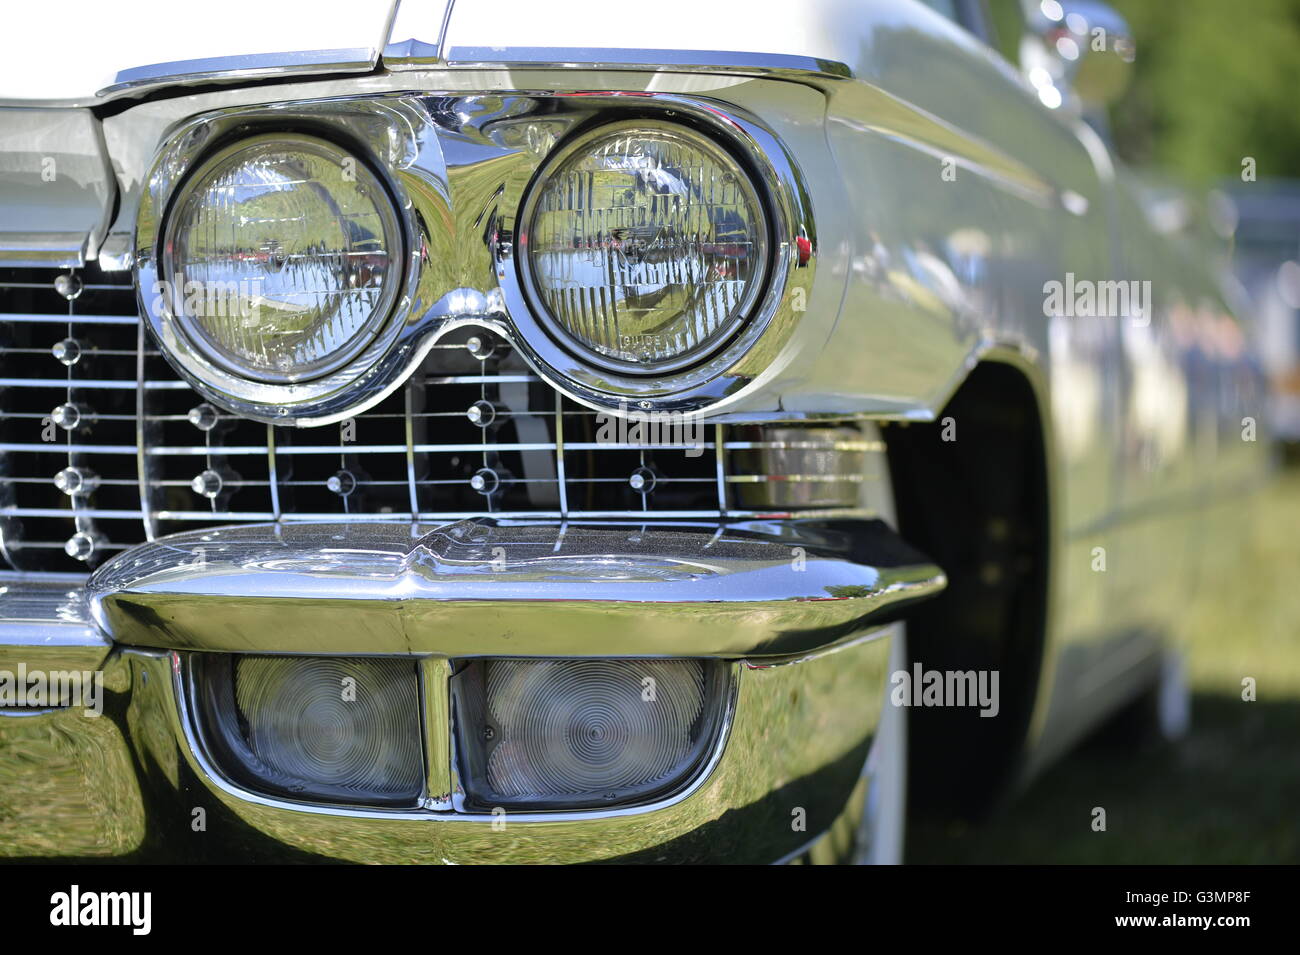 Westbury, New York, USA. June 12, 2016.  Chrome double headlights and running lights are seen in close up of classic1960 white Cadillac sedan on display at the Antique and Collectible Auto Show at the 50th Annual Spring Meet at Old Westbury Gardens, in the Gold Coast of Long Island, and sponsored by Greater New York Region, GNYR, Antique Automobile Club of America, AACA. Participating vehicles in the judged show included hundreds of domestic and foreign, antique, classic, collectible, and modern cars. Stock Photo